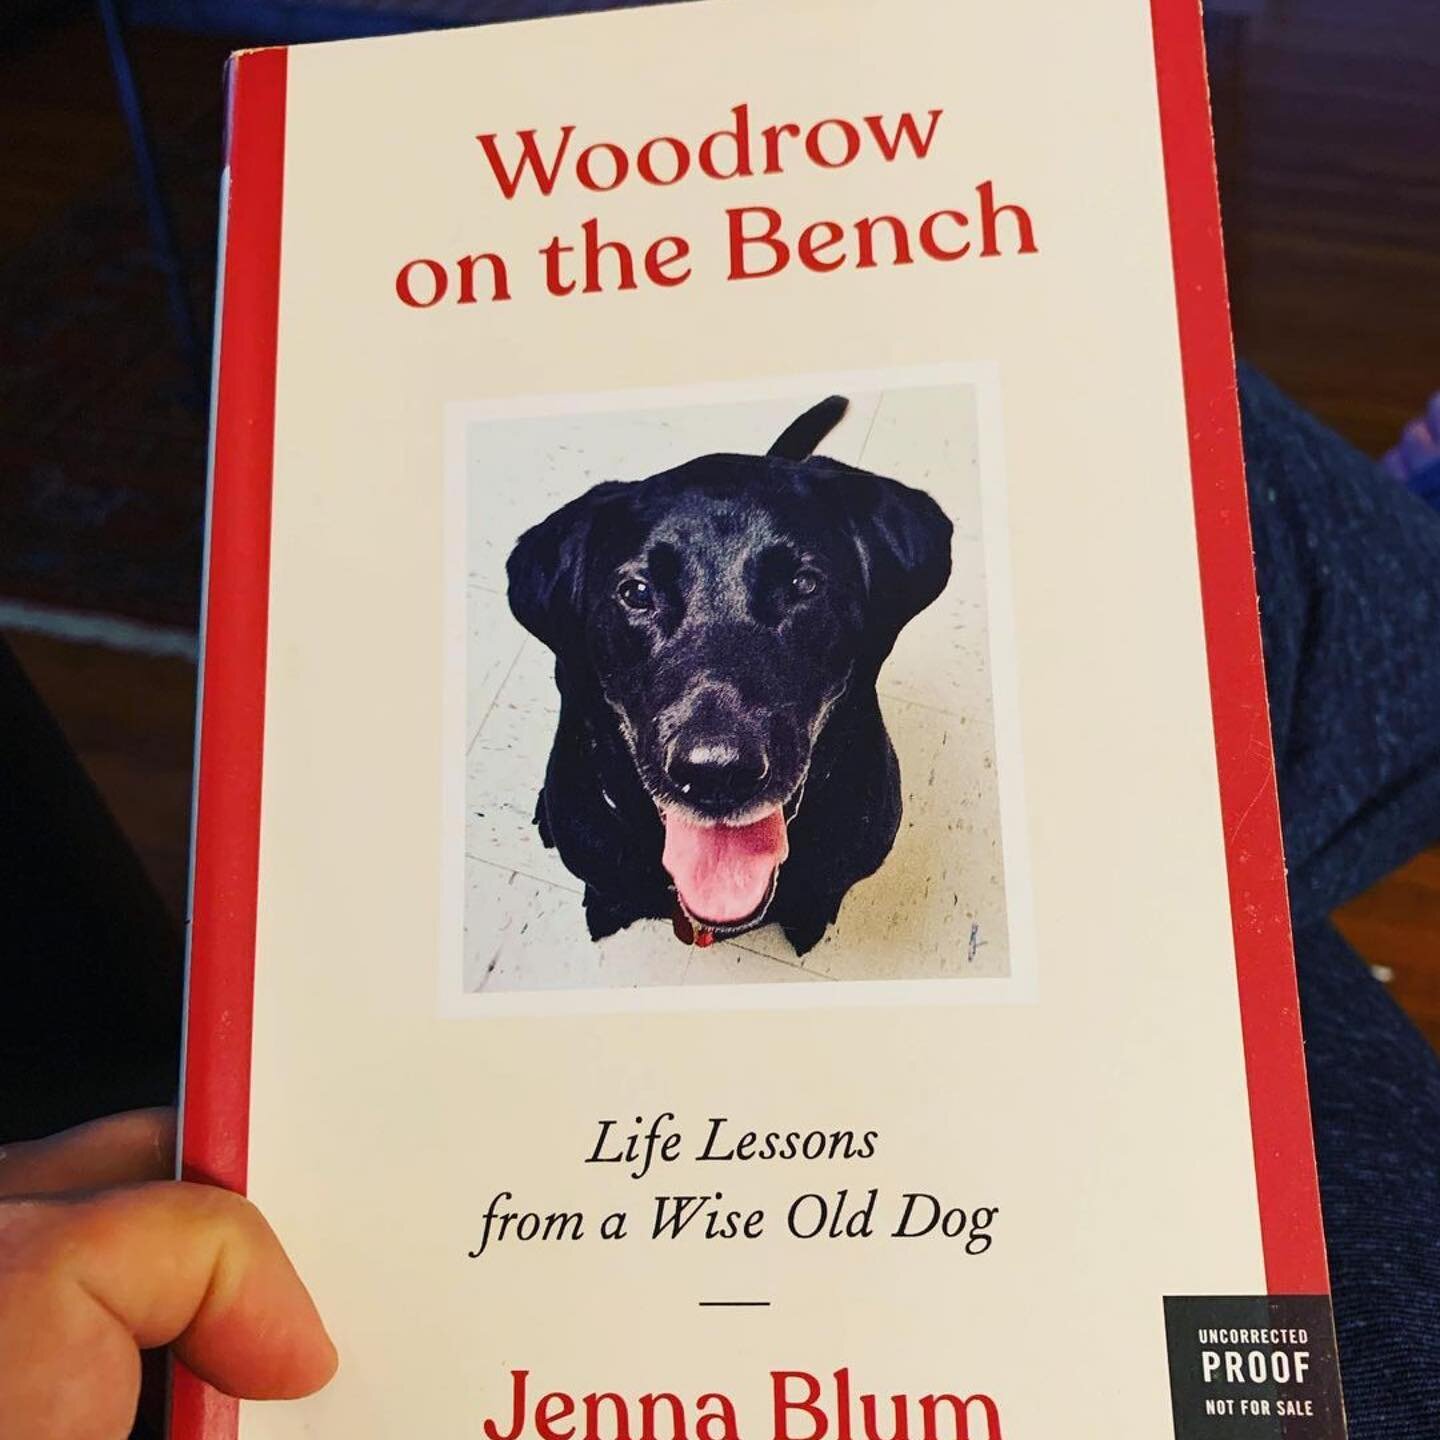 Thank you very much to The @alexgeorge for reading the book about ME. I hear The Alex has a very good DOG named The Theo, to whom I send my best regards me fervent wishes for extra bacon today. 🐾🥓
🥓🥓🥓
@harperbooks @mmqlit @skylarkbookshop @beitn